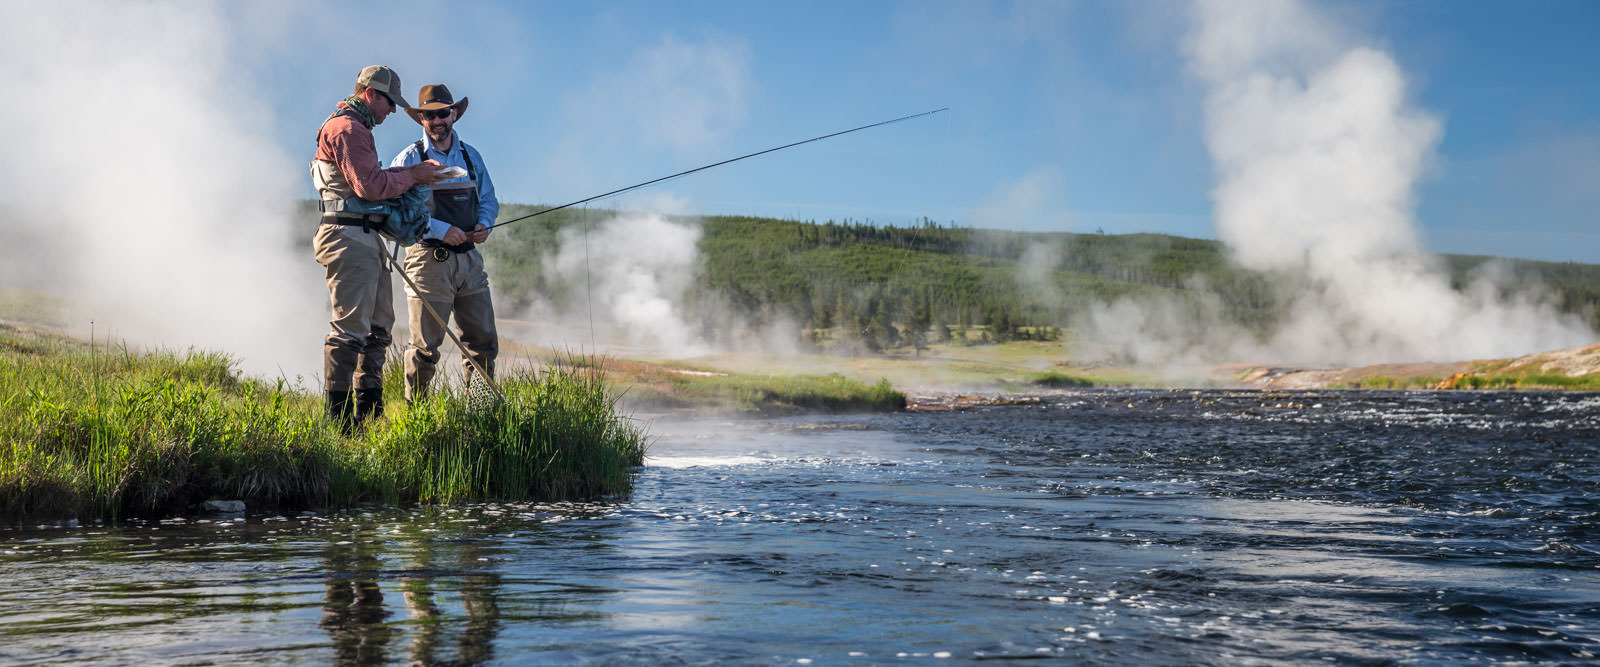 Montana Fly Fishing  Information on Rivers, Guides and Lodges